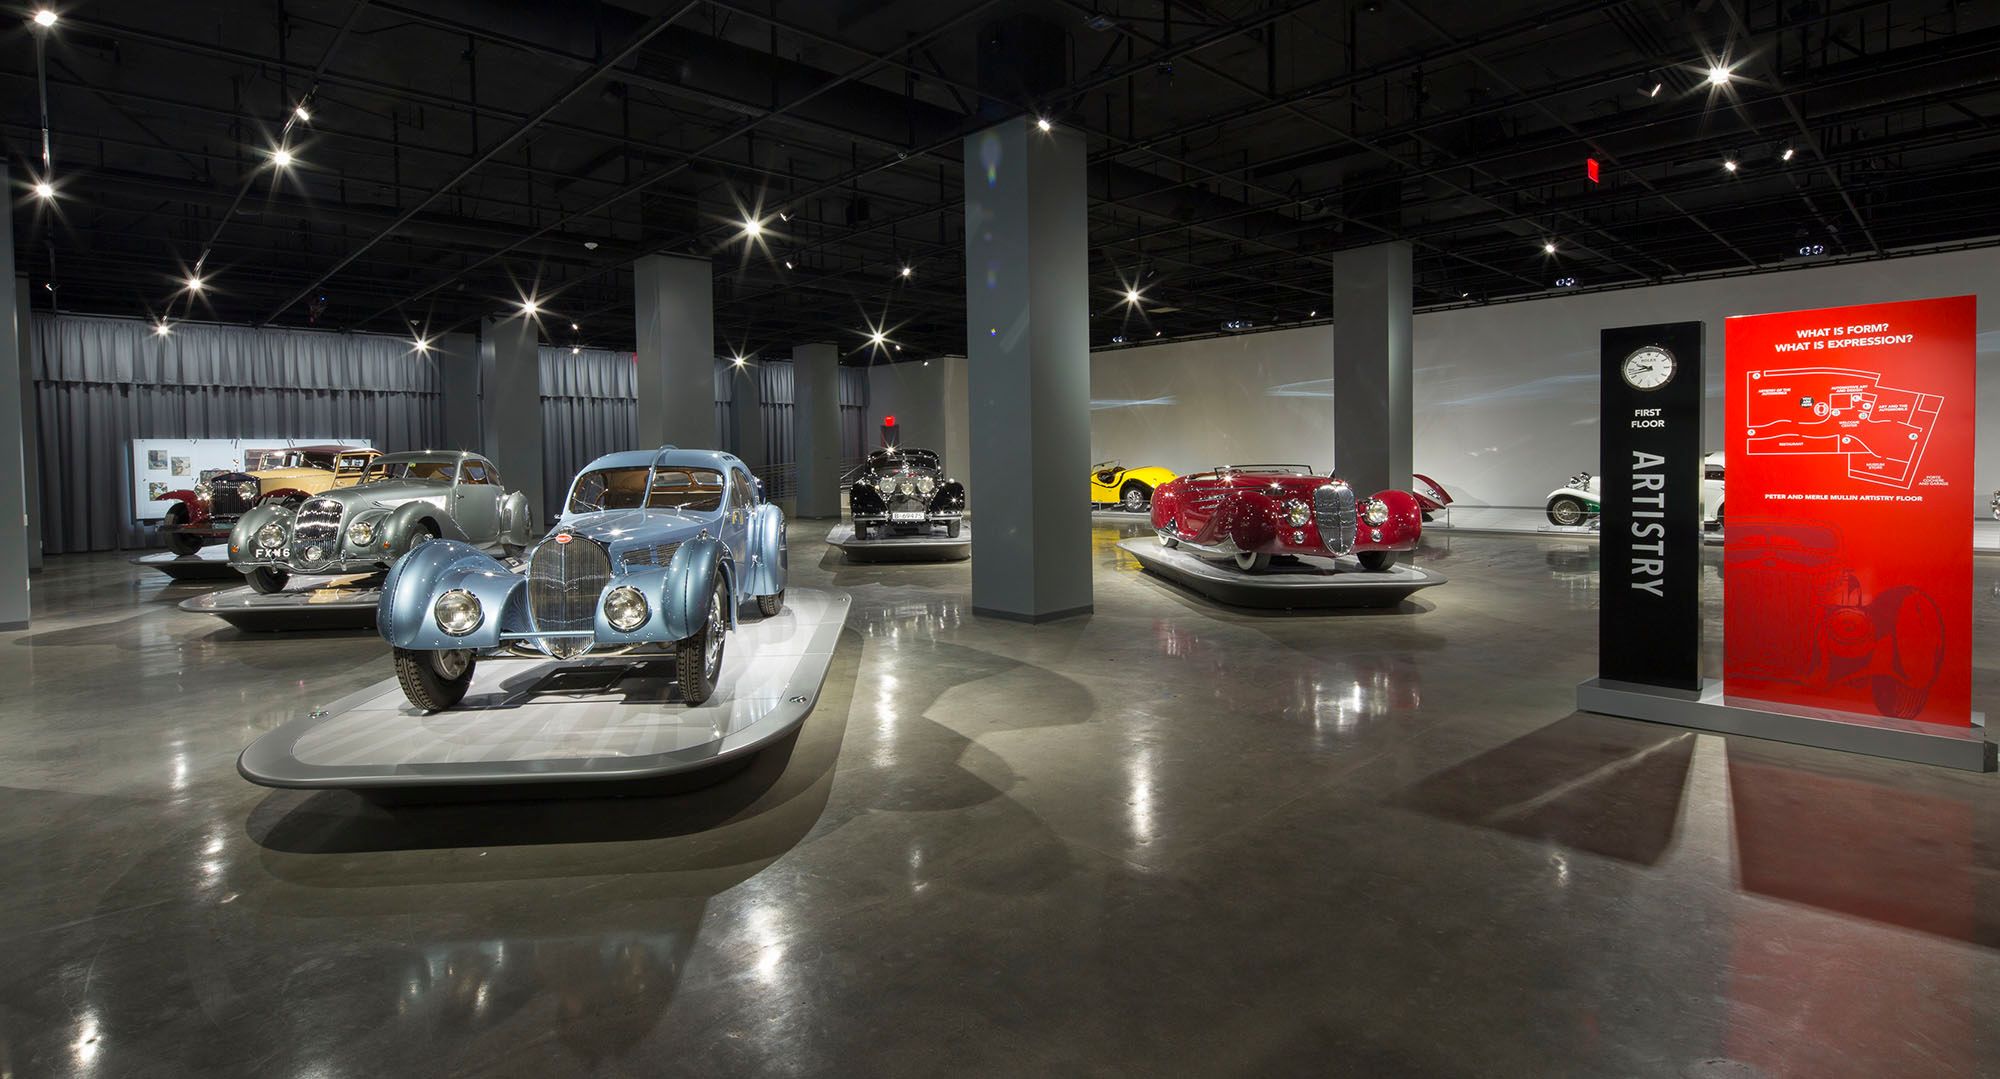 Six Classic Car Museums To Add To Your Bucket List